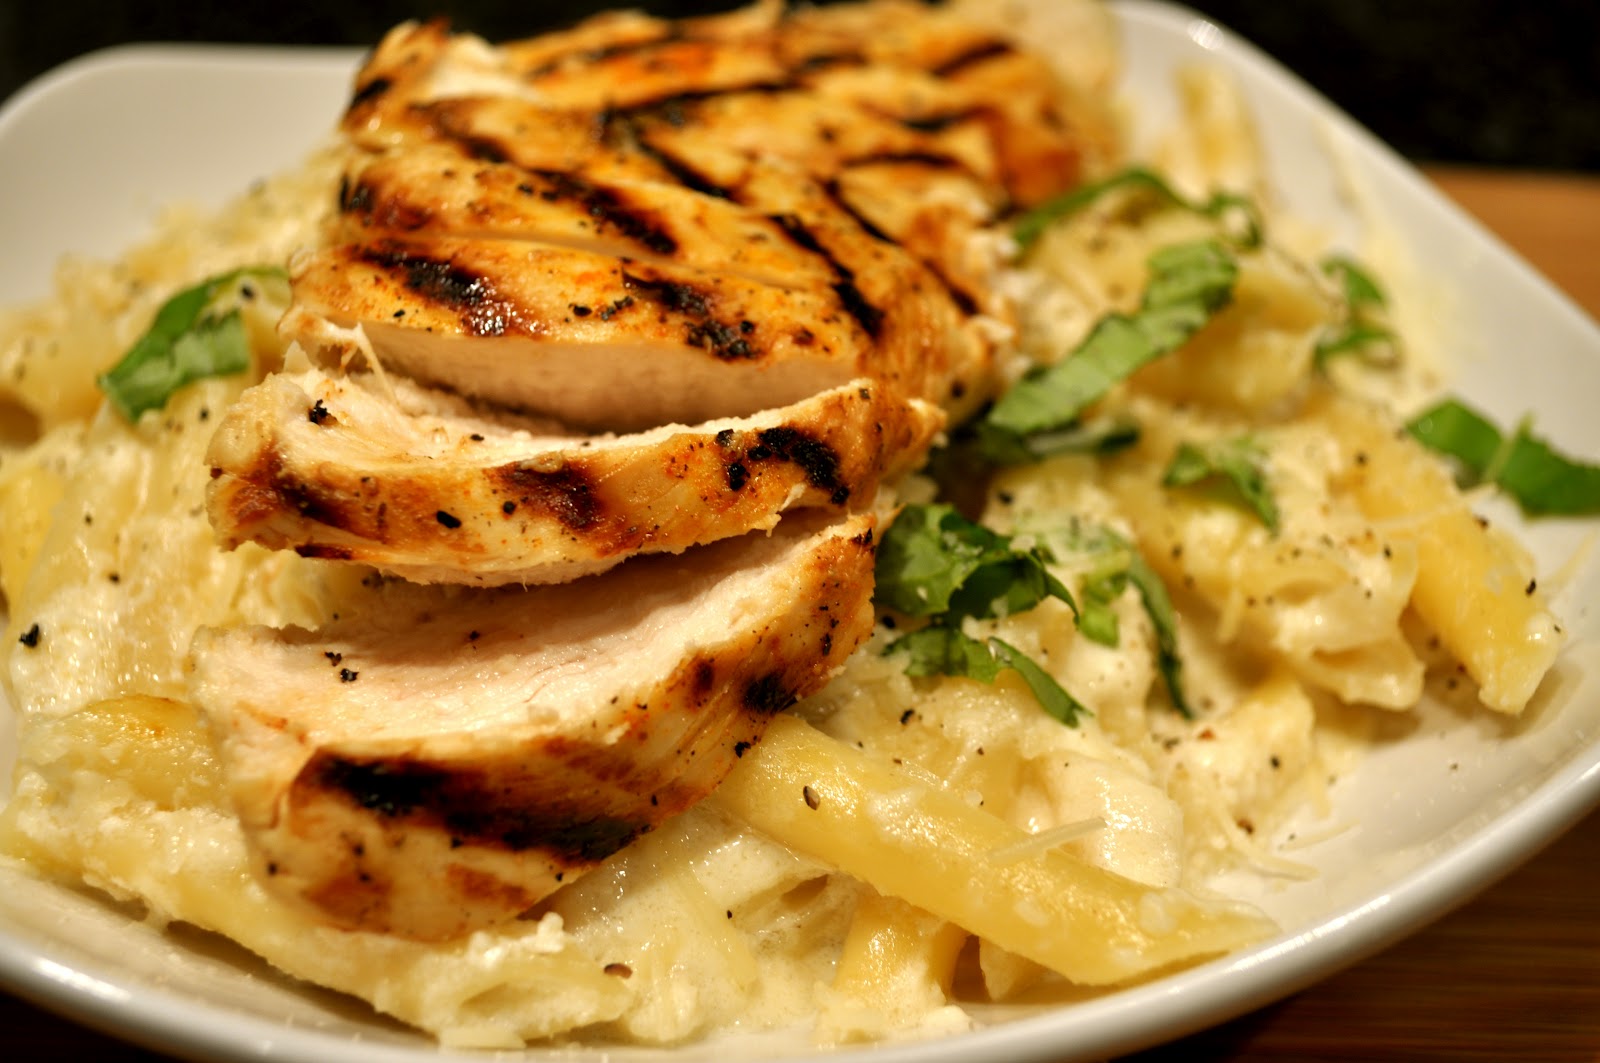 One Classy Dish: Grilled Chicken with Lemon Parmesan Pasta